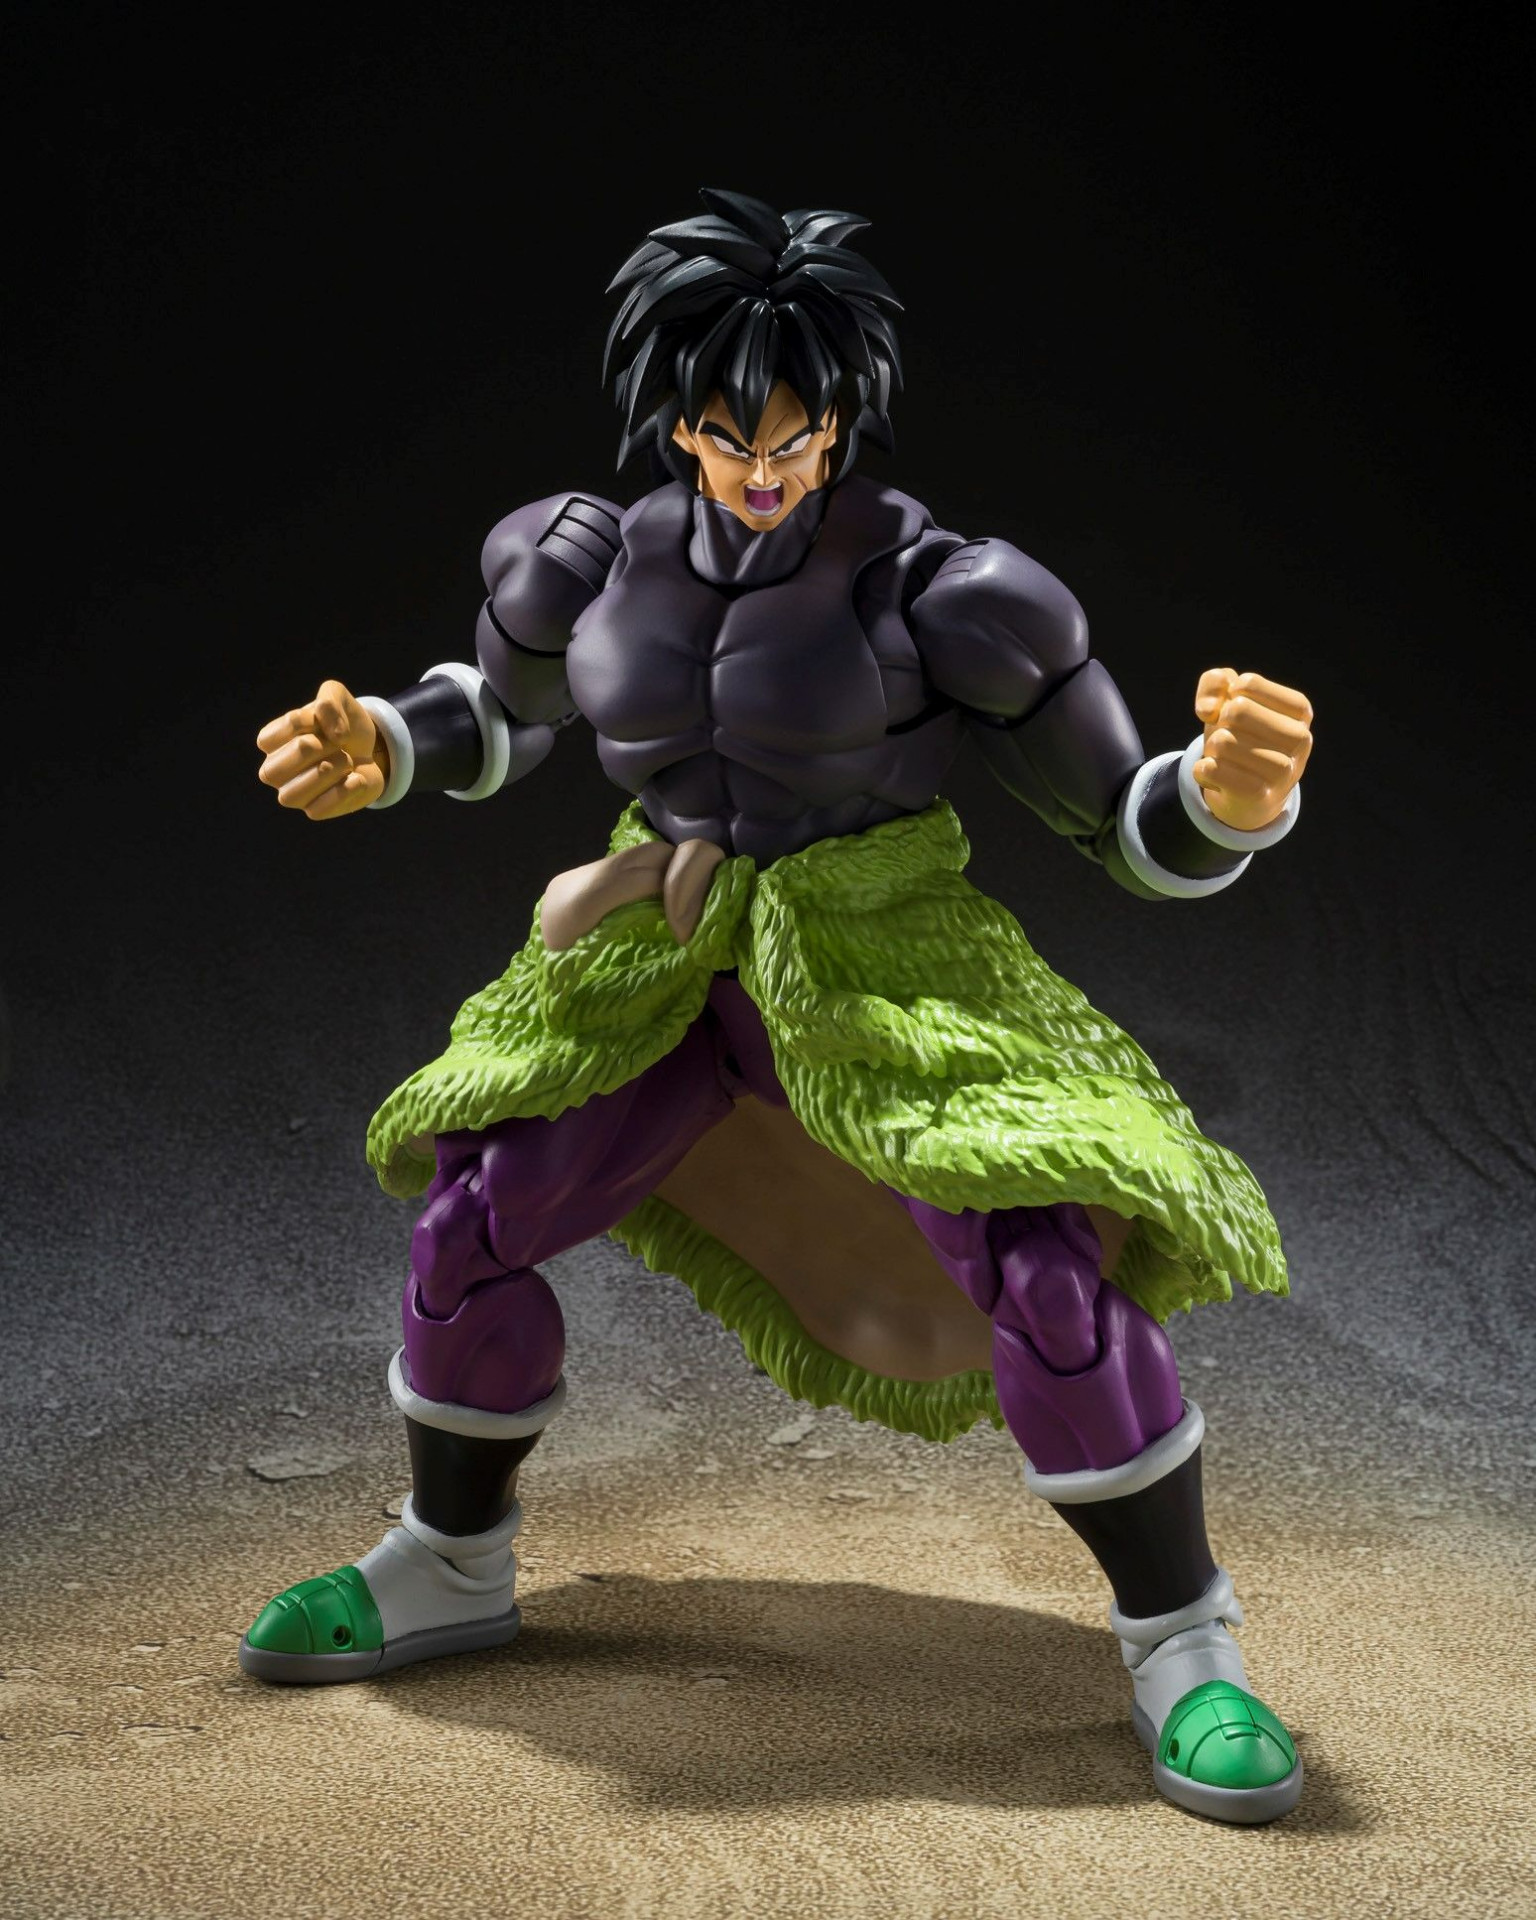 A Brand-New Broly Figure Is Coming to the S.H. Figuarts Series!